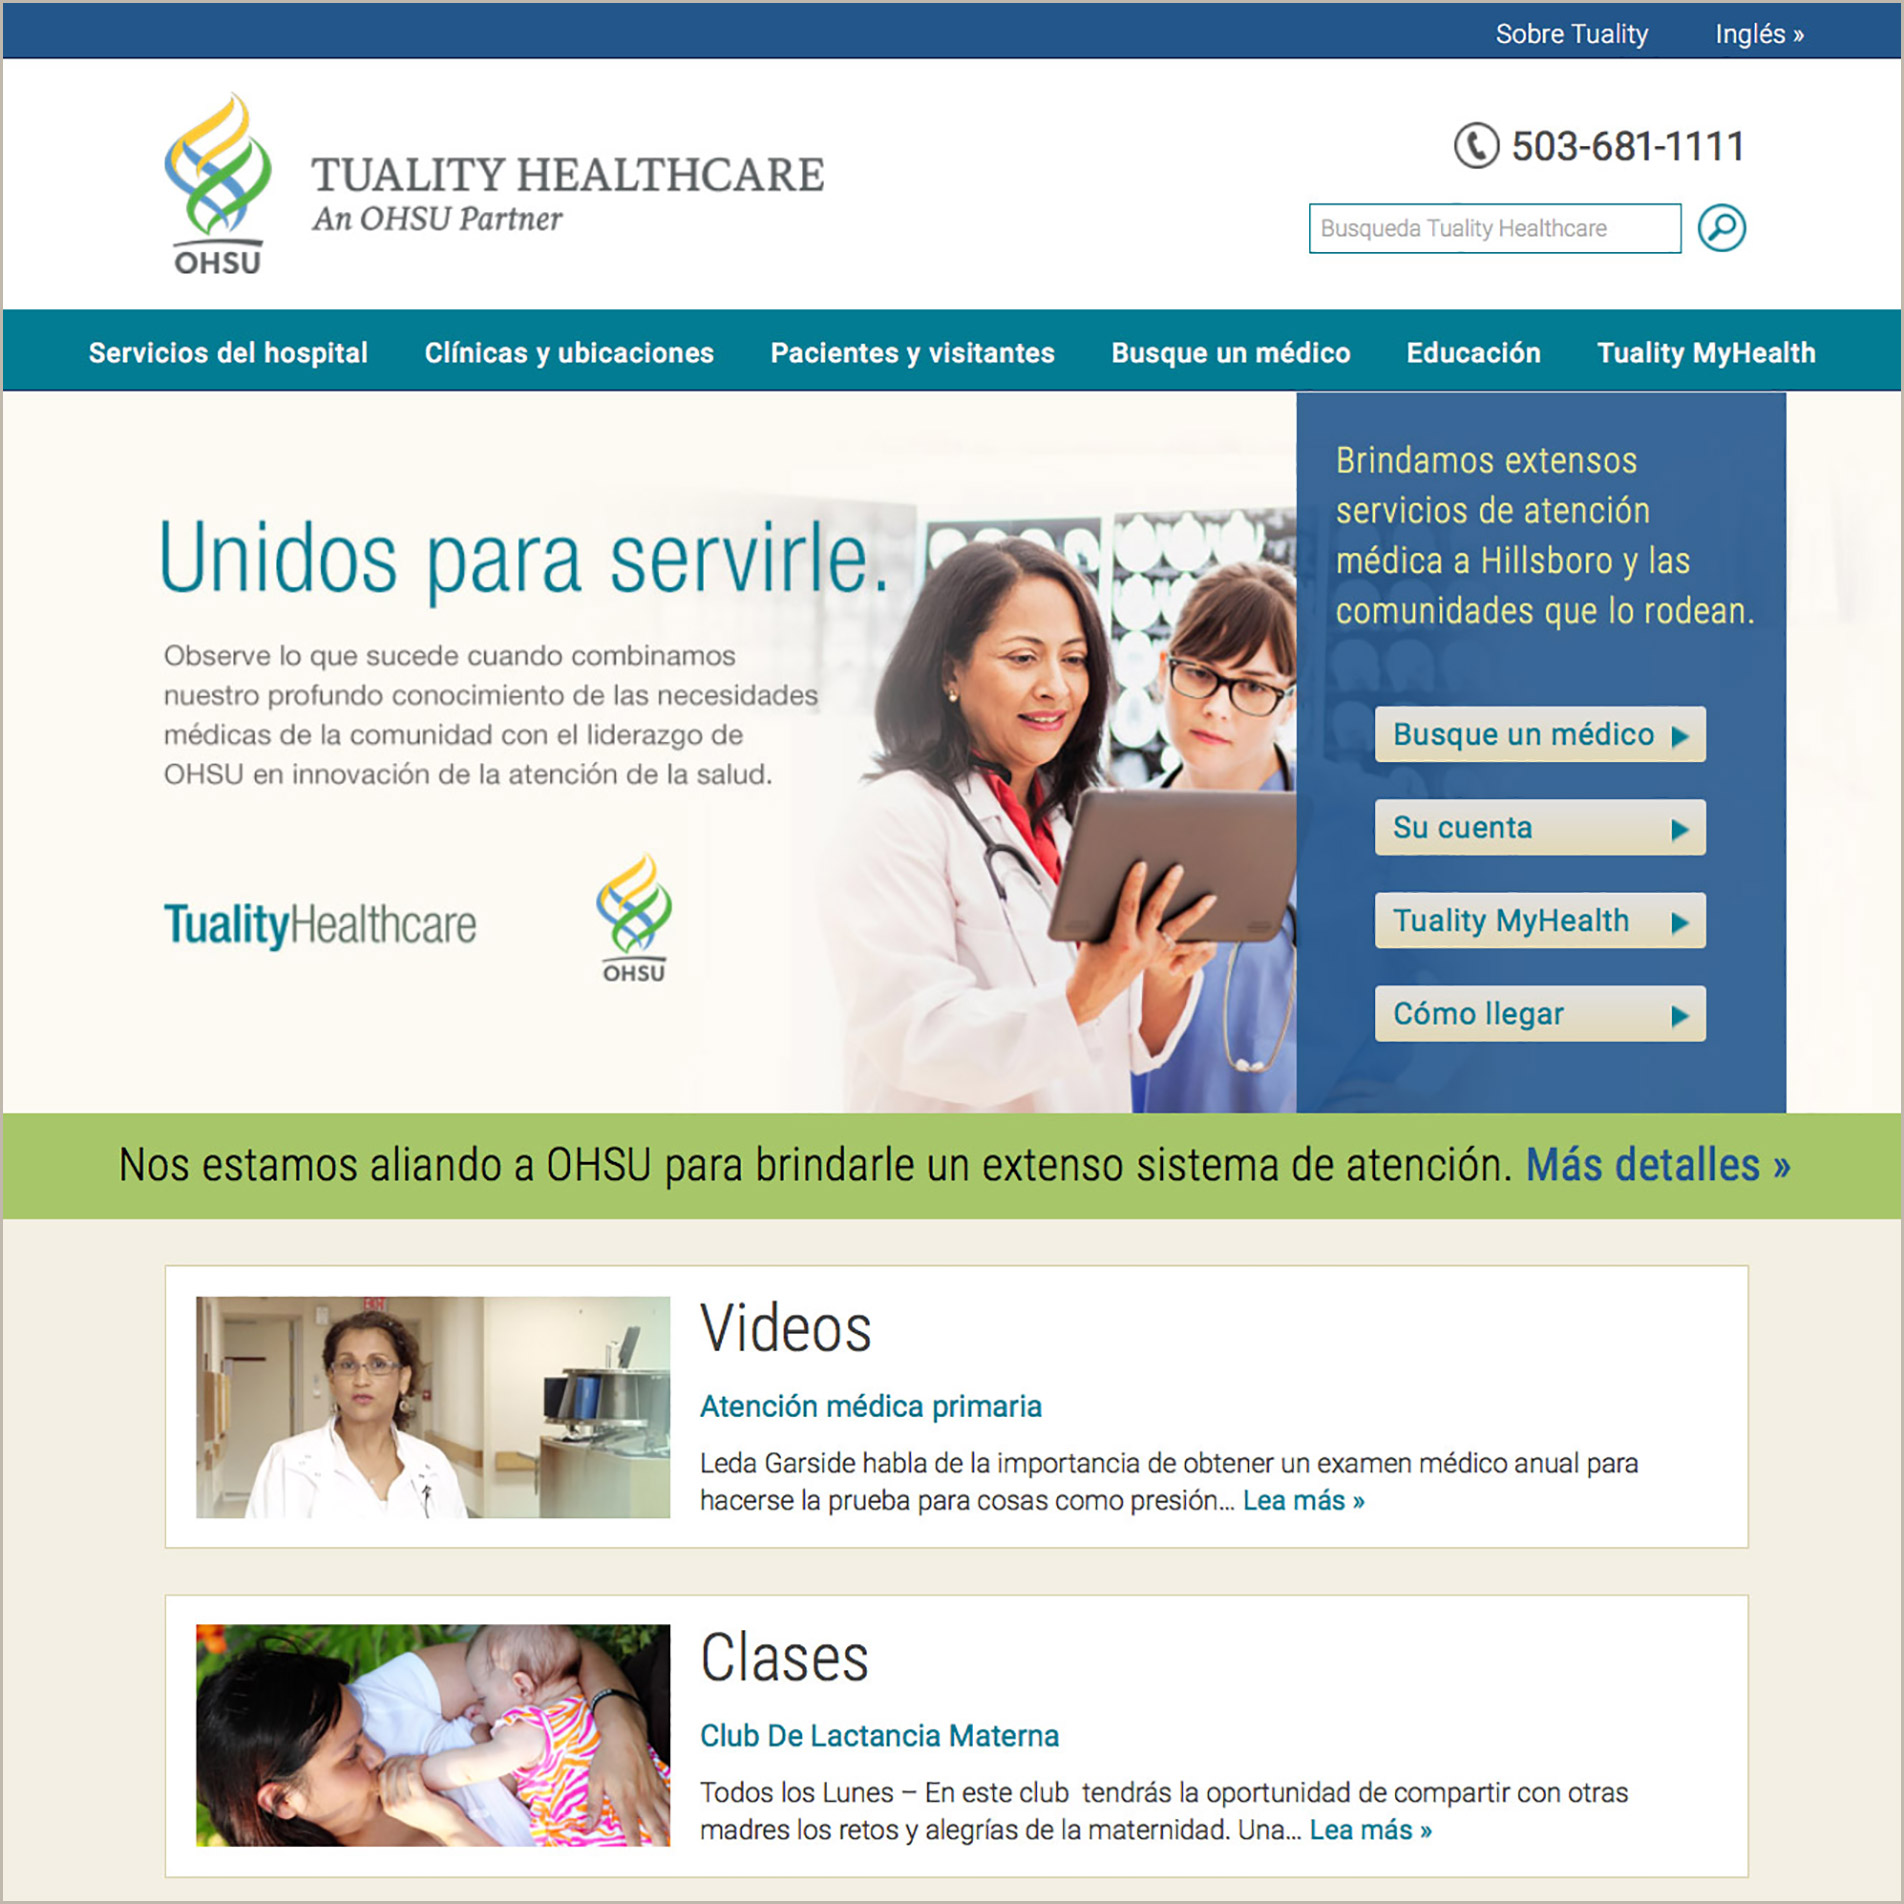 Tuality Healthcare Espanol home page redesign